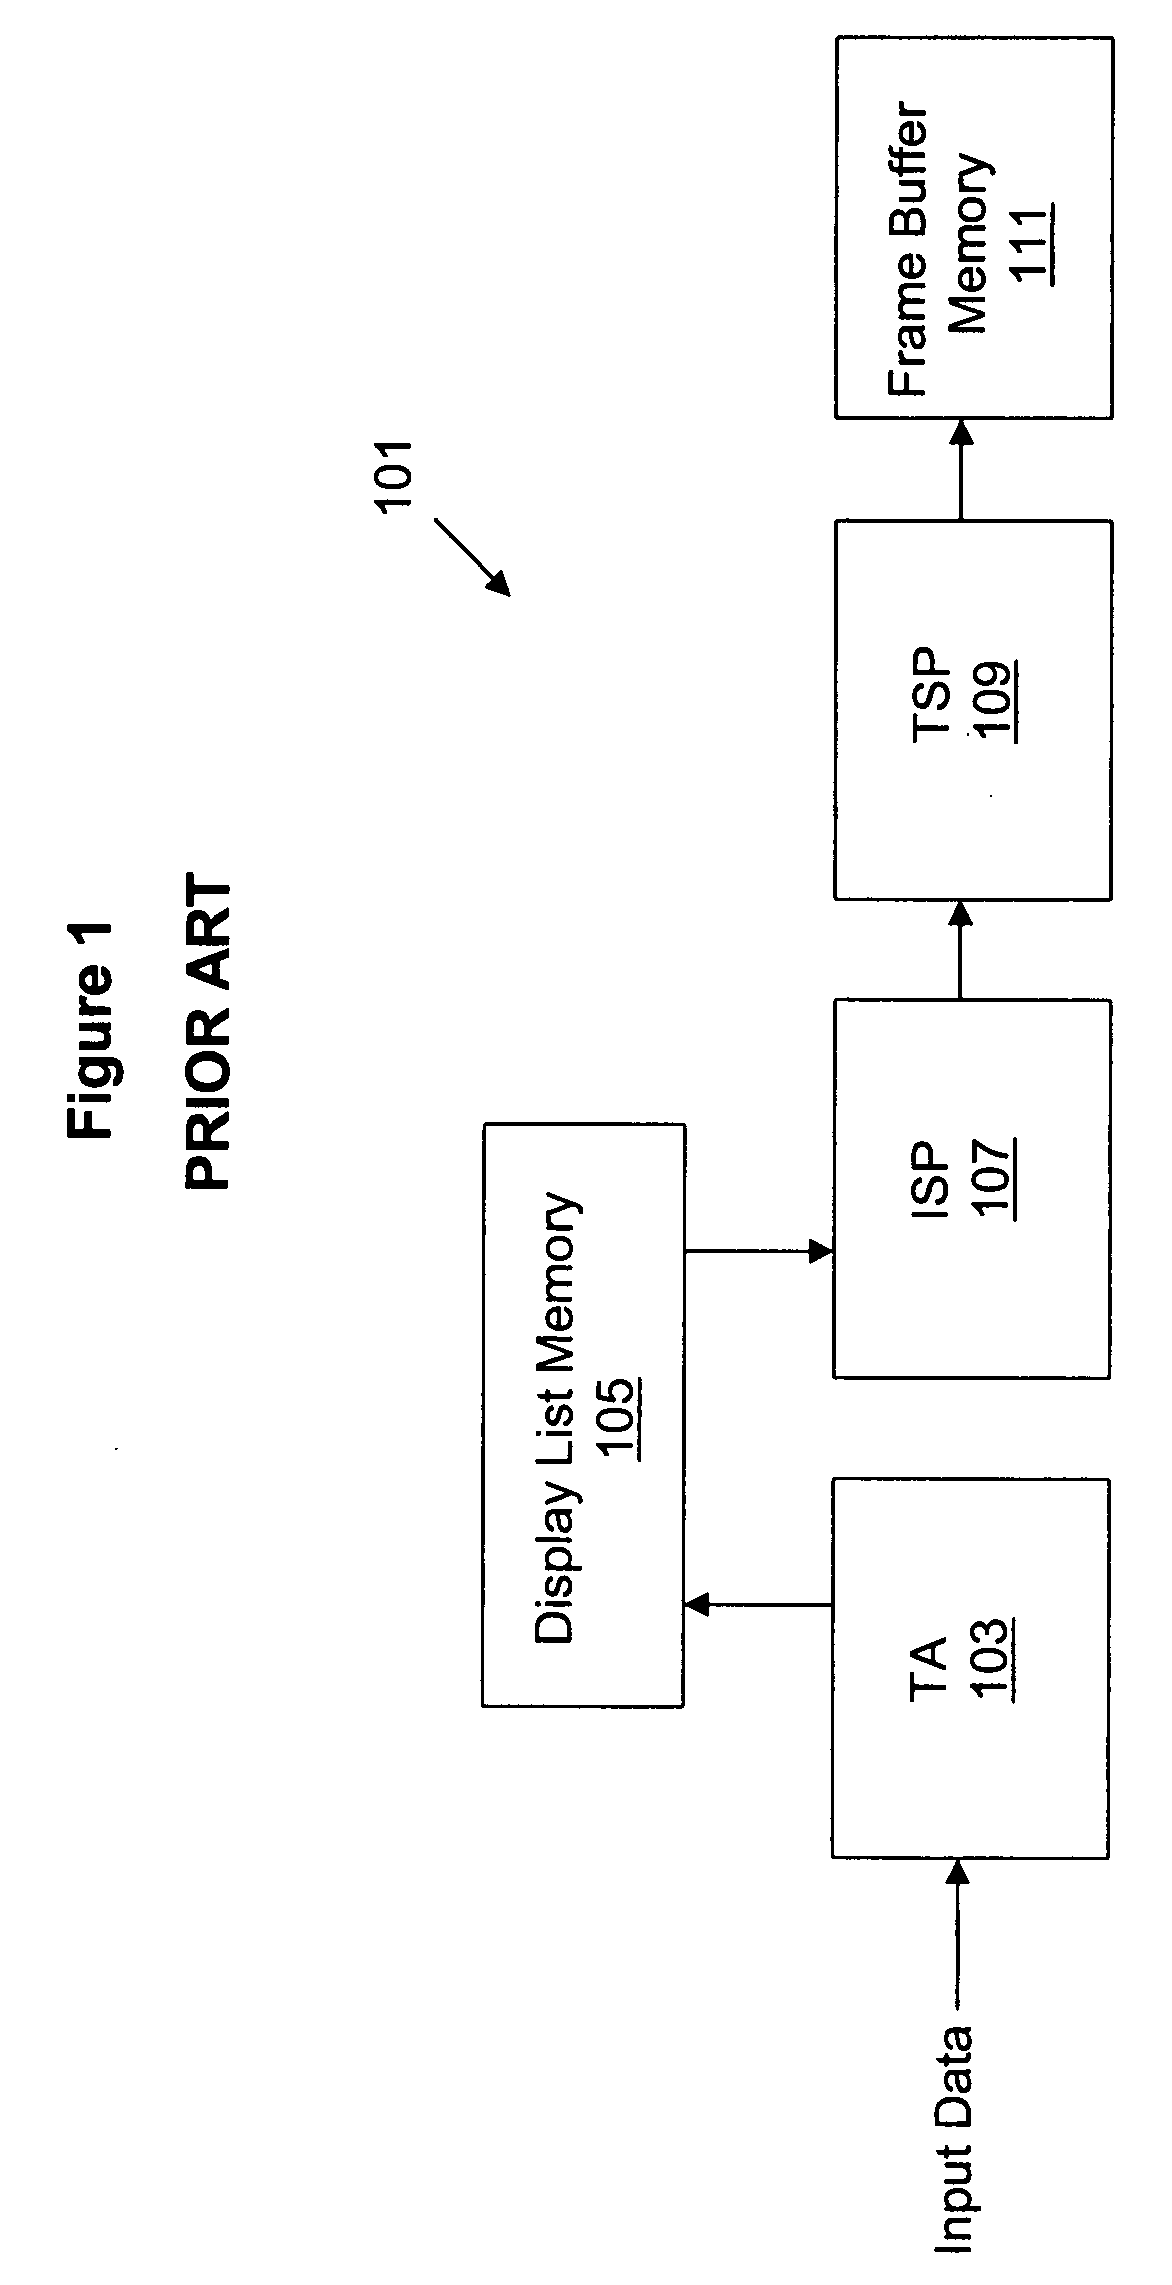 Methods and systems for generating 3-dimensional computer images